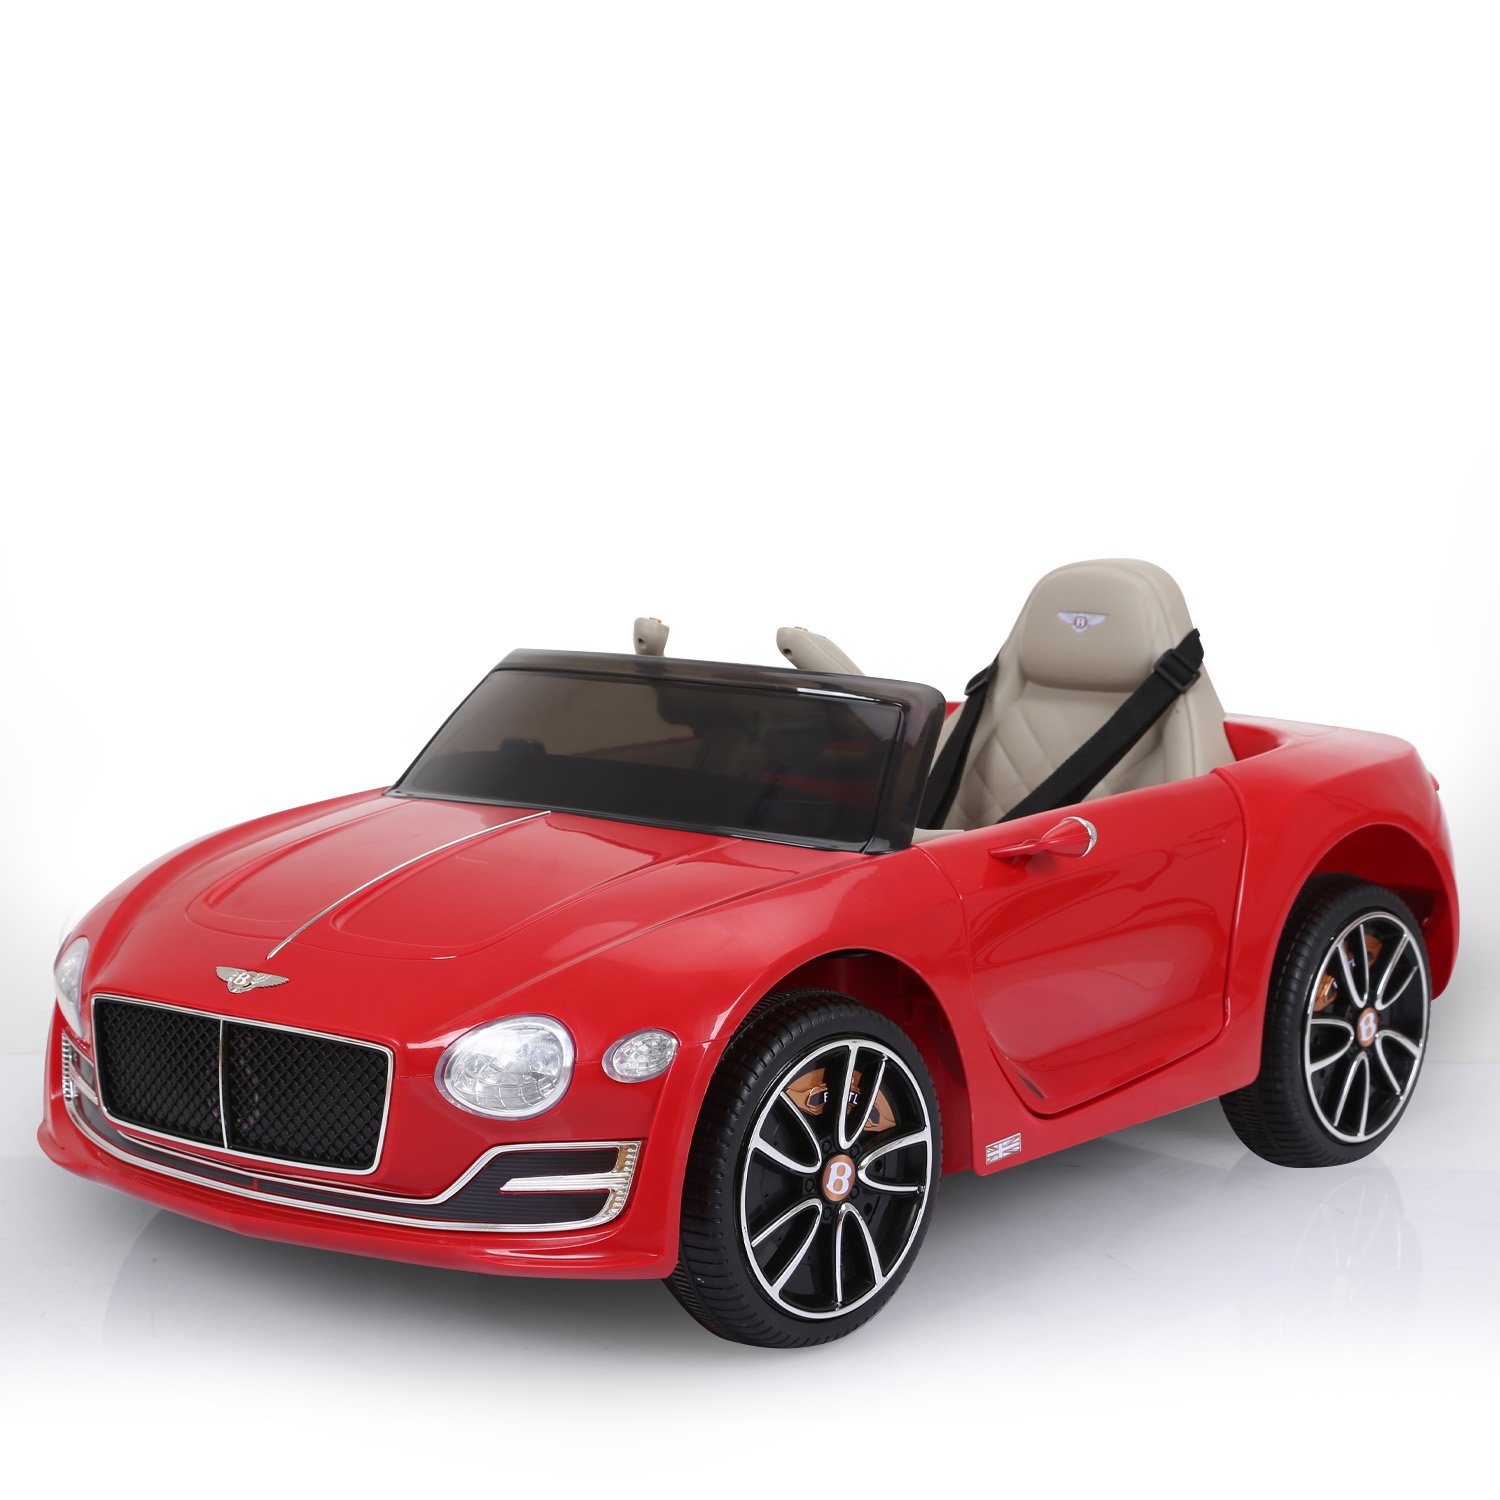 Bentley Exp 12 Speed 6E Licensed Kids Ride On Electric Car Remote Control - Red 2